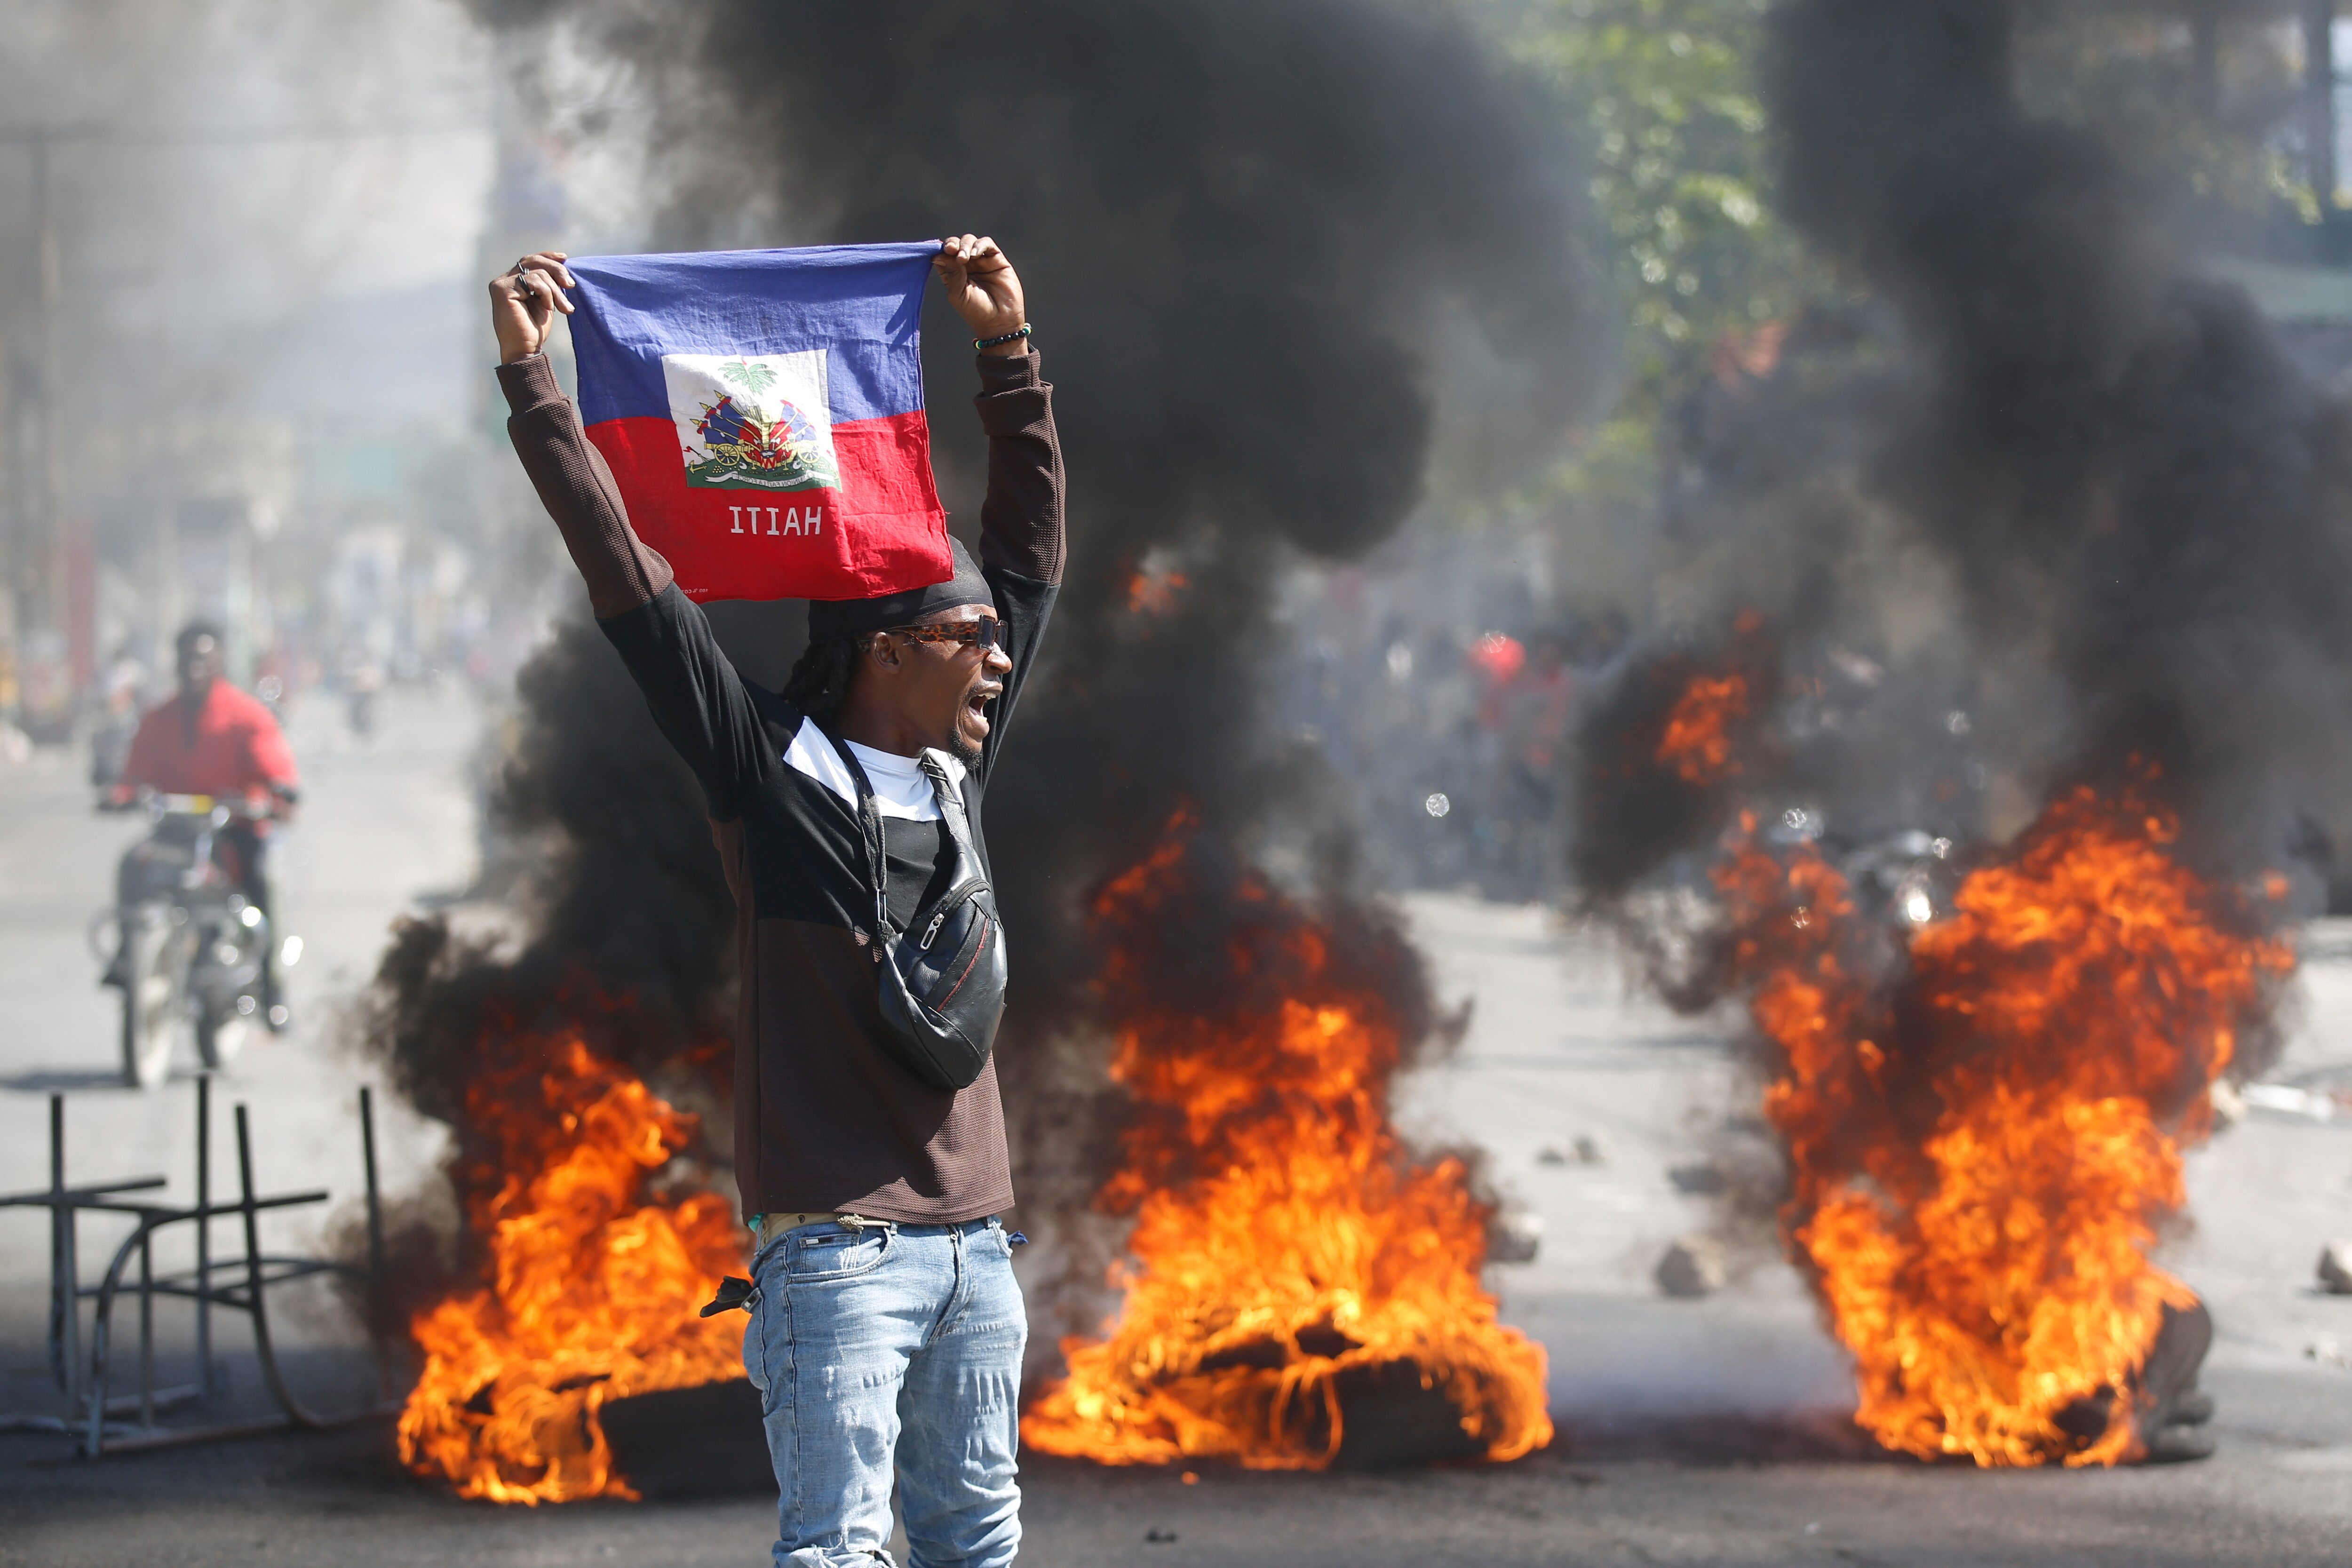 What’s going on in Haiti? The news from the Caribbean nation’s crisis